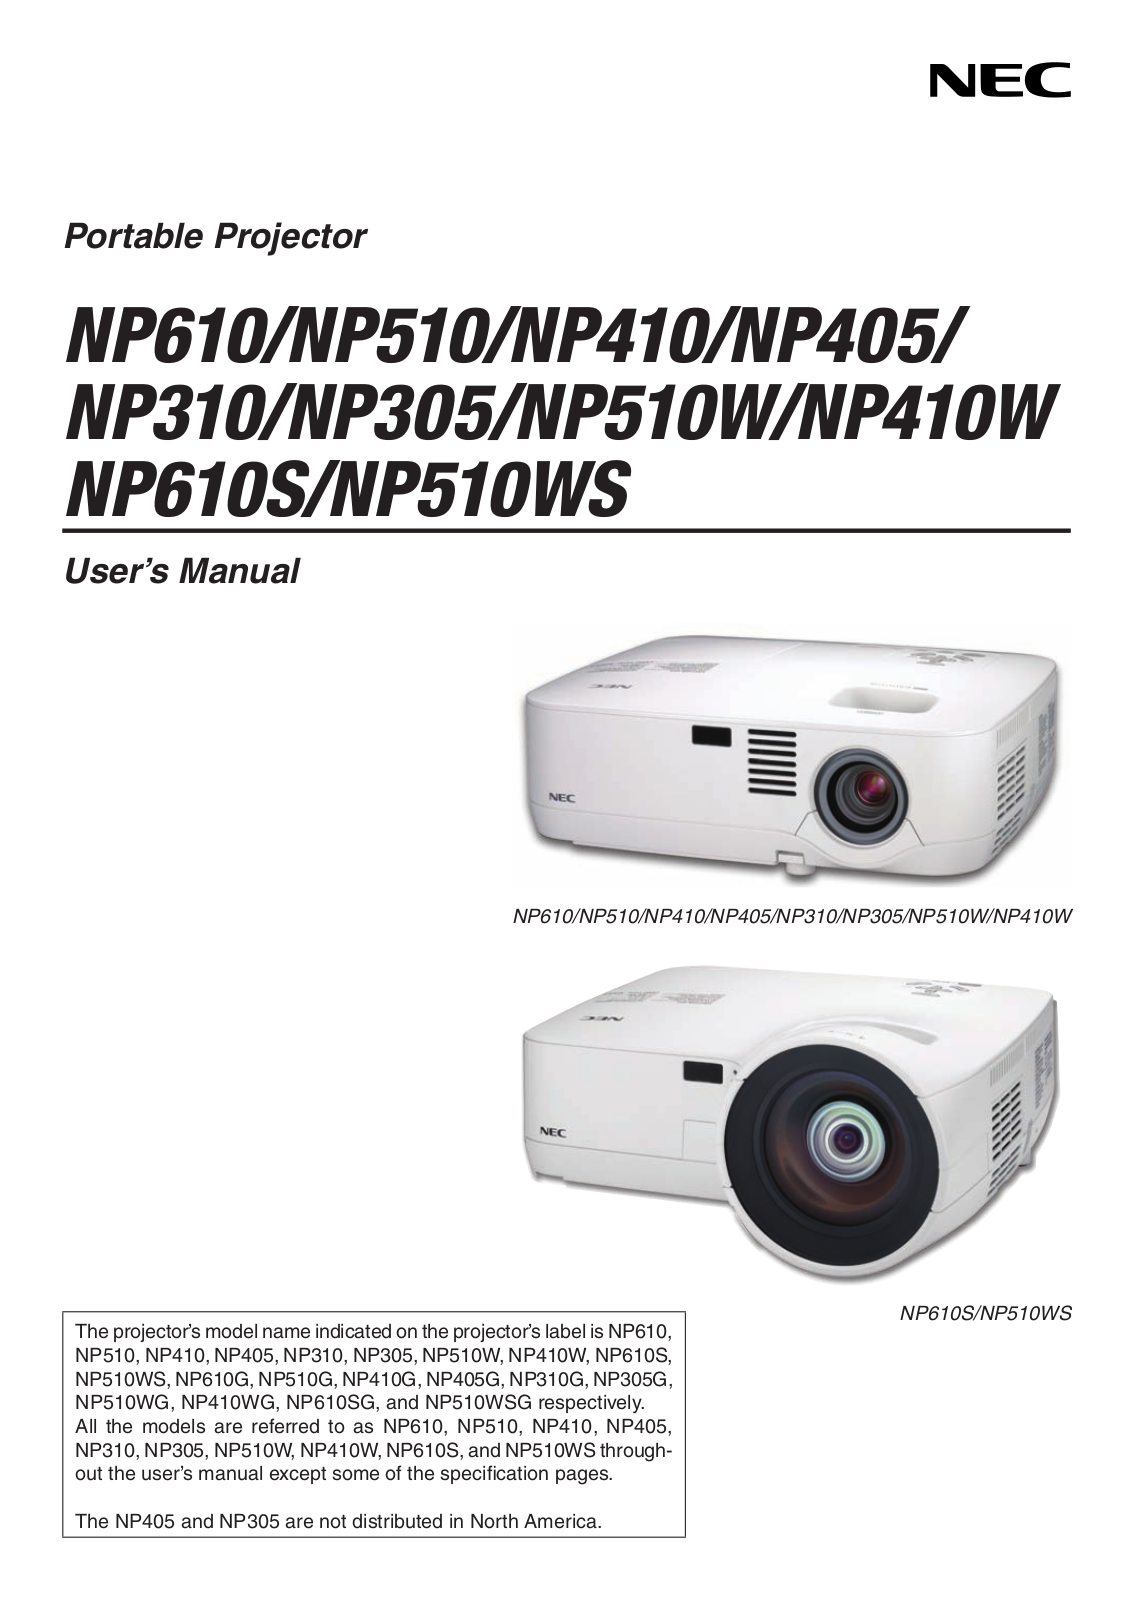 NEC NP305, NP310, NP405, NP410, NP510 Owner Manual